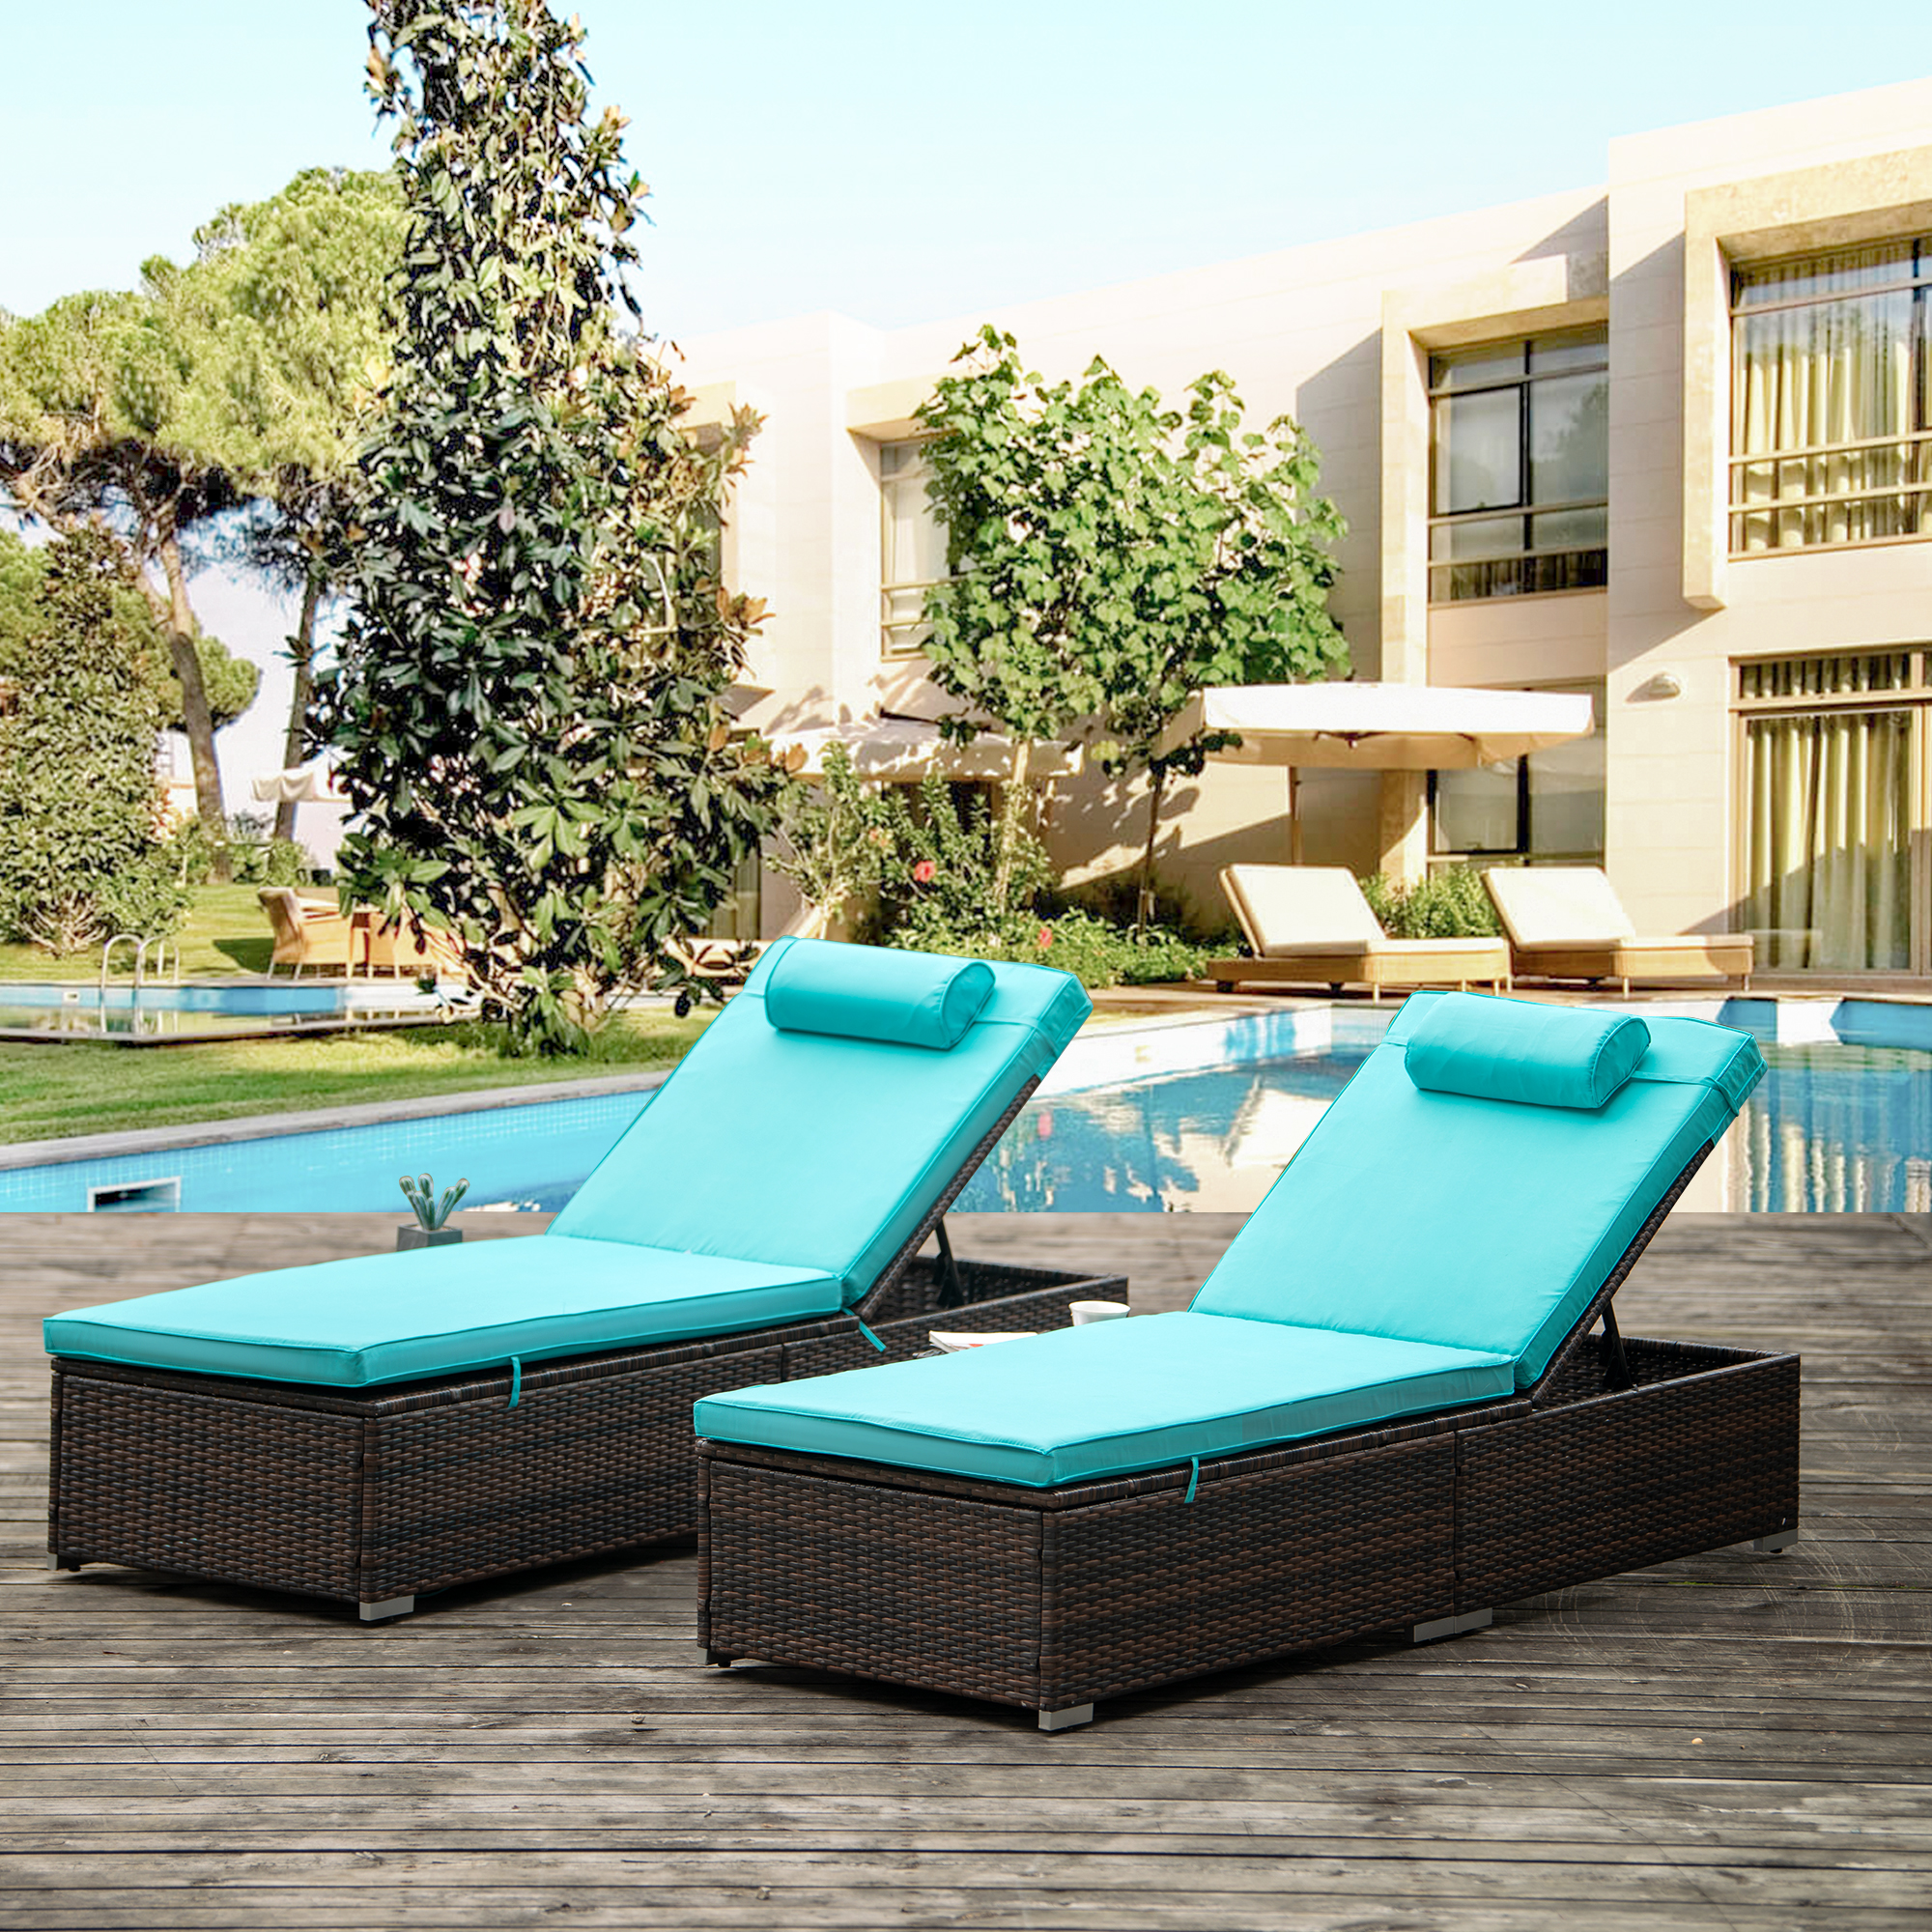 2 Piece Outdoor Patio Chaise Lounge, PE Wicker Lounge Chairs with Adjustable Backrest Recliners and Side Table, Reclining Chair Furniture Set with Cushions for Poolside Deck Patio Garden, K2698 - image 3 of 11